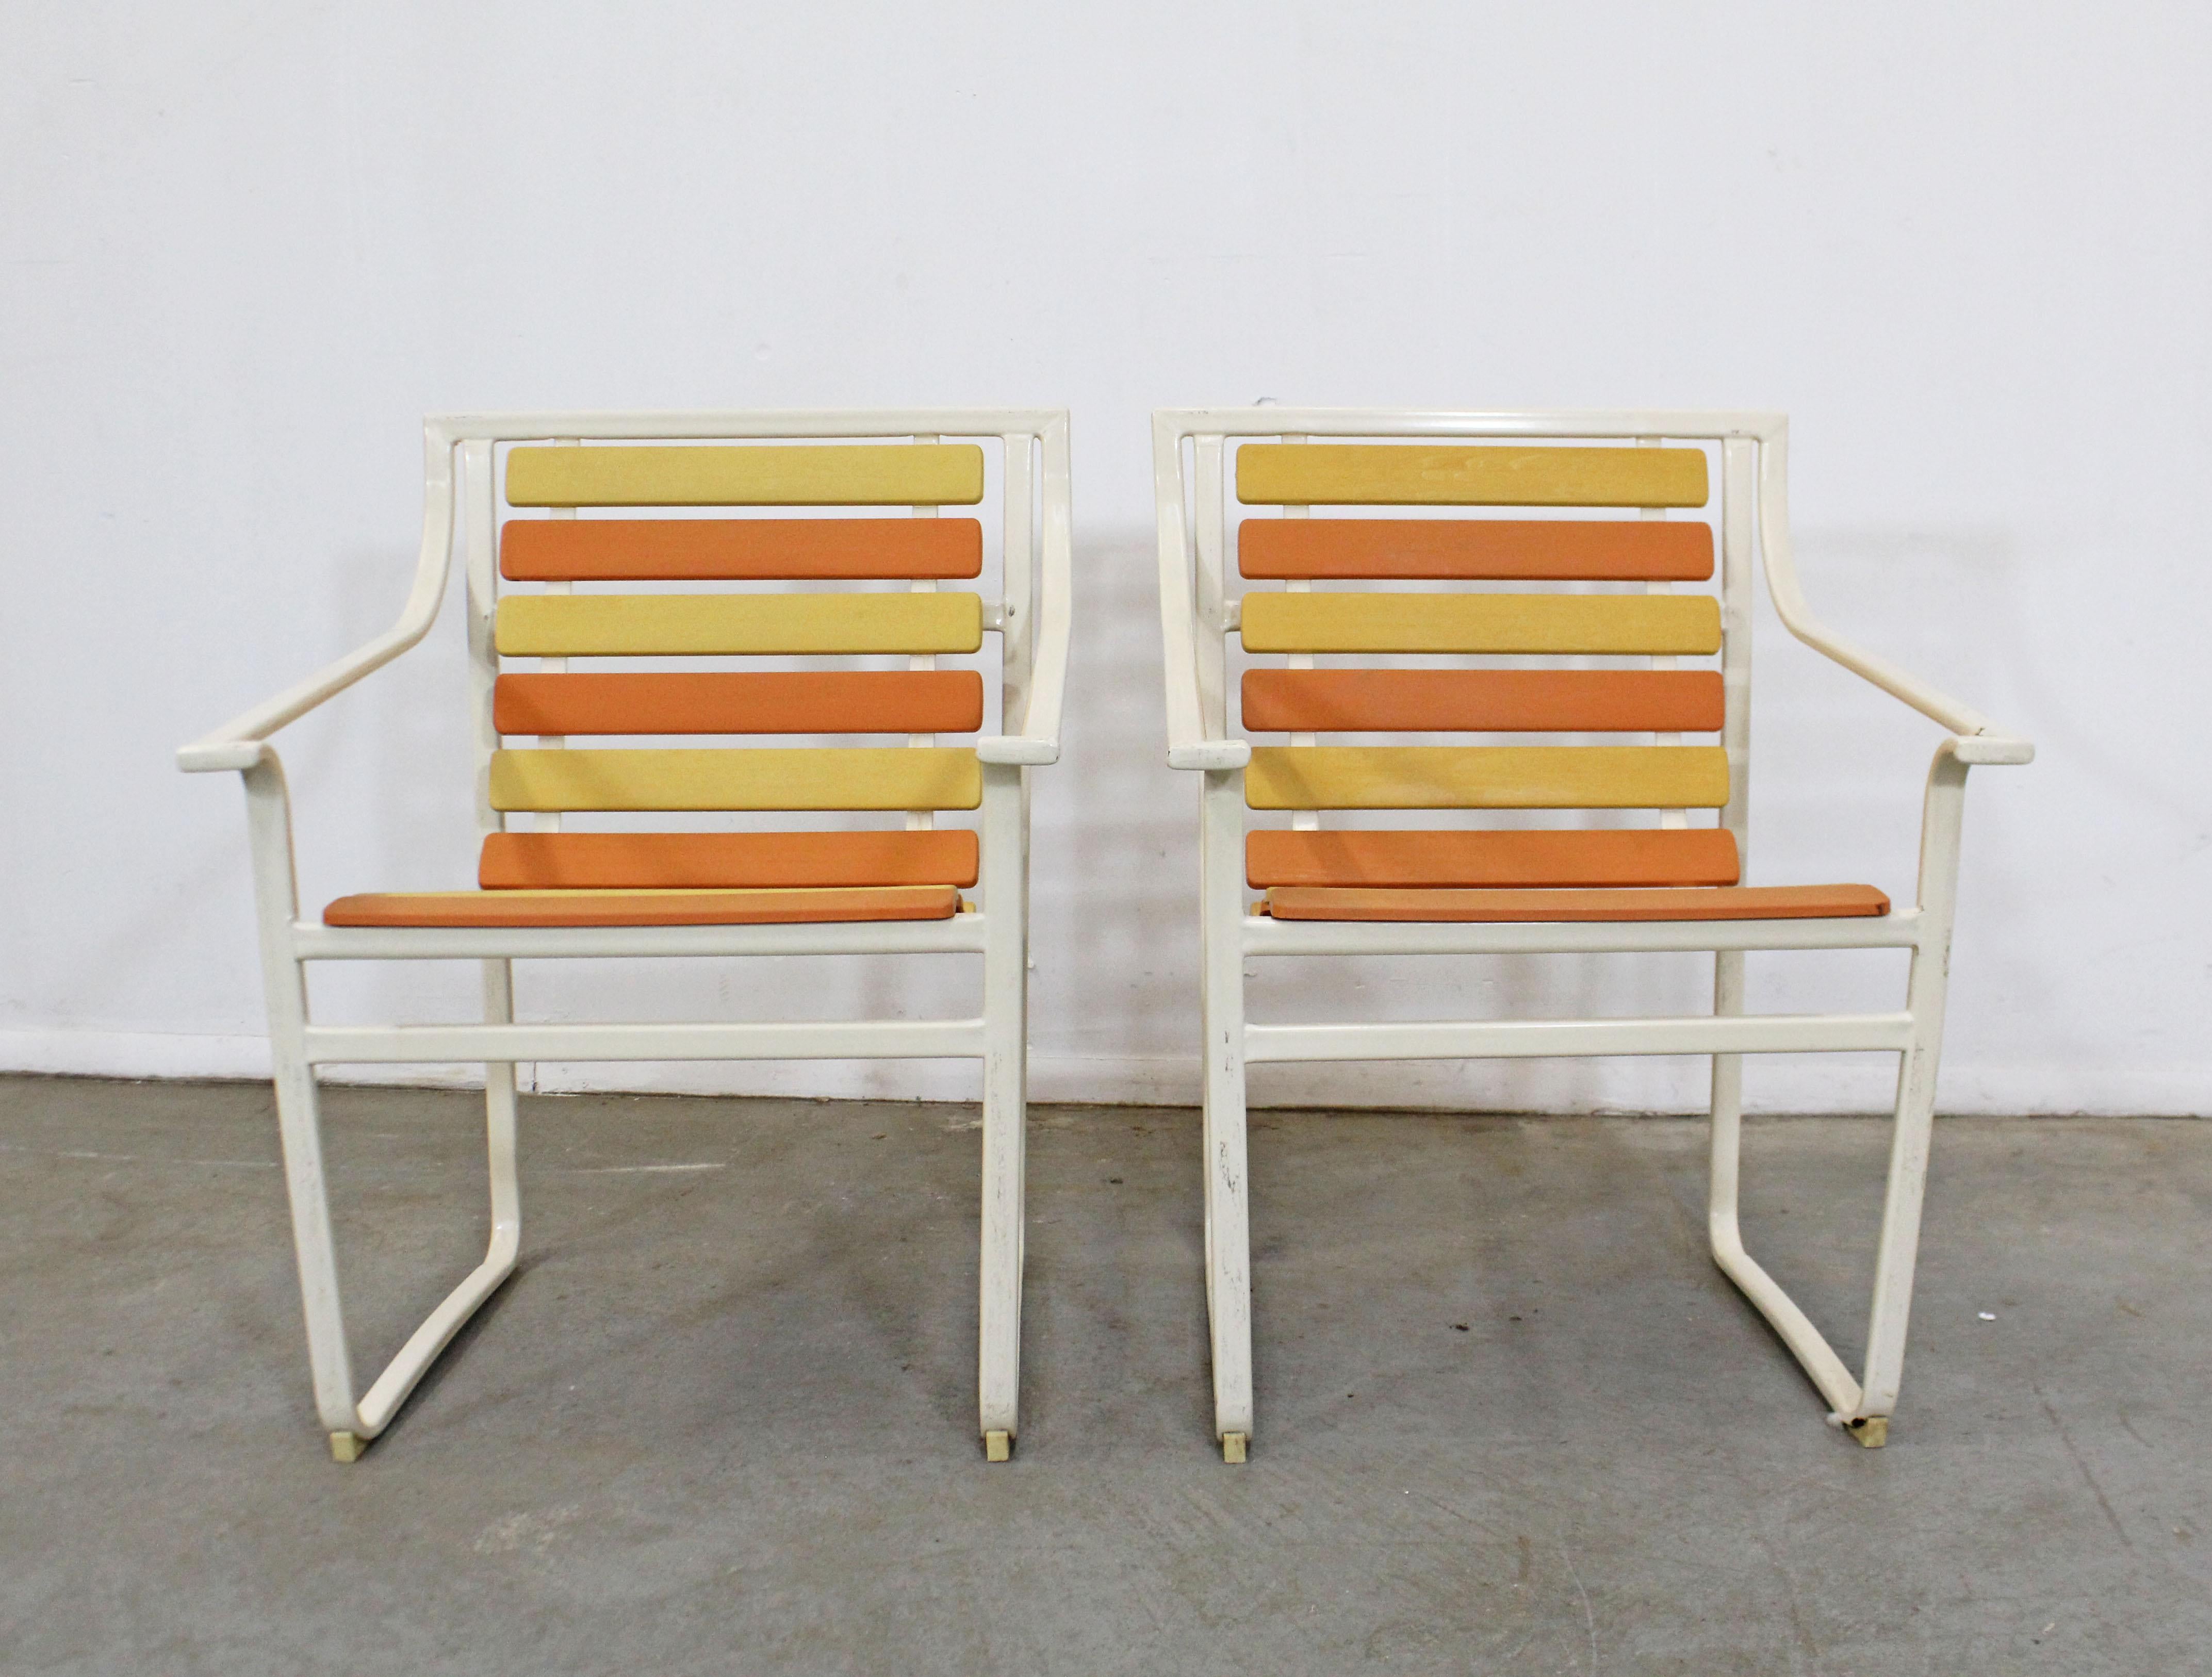 What a find. Offered is a pair of vintage midcentury outdoor arm chairs with flat tubular steel frames and orange/yellow plastic slats. They were made by Samsonite (circa 1960s). In good structurally sound condition, has visible surface wear